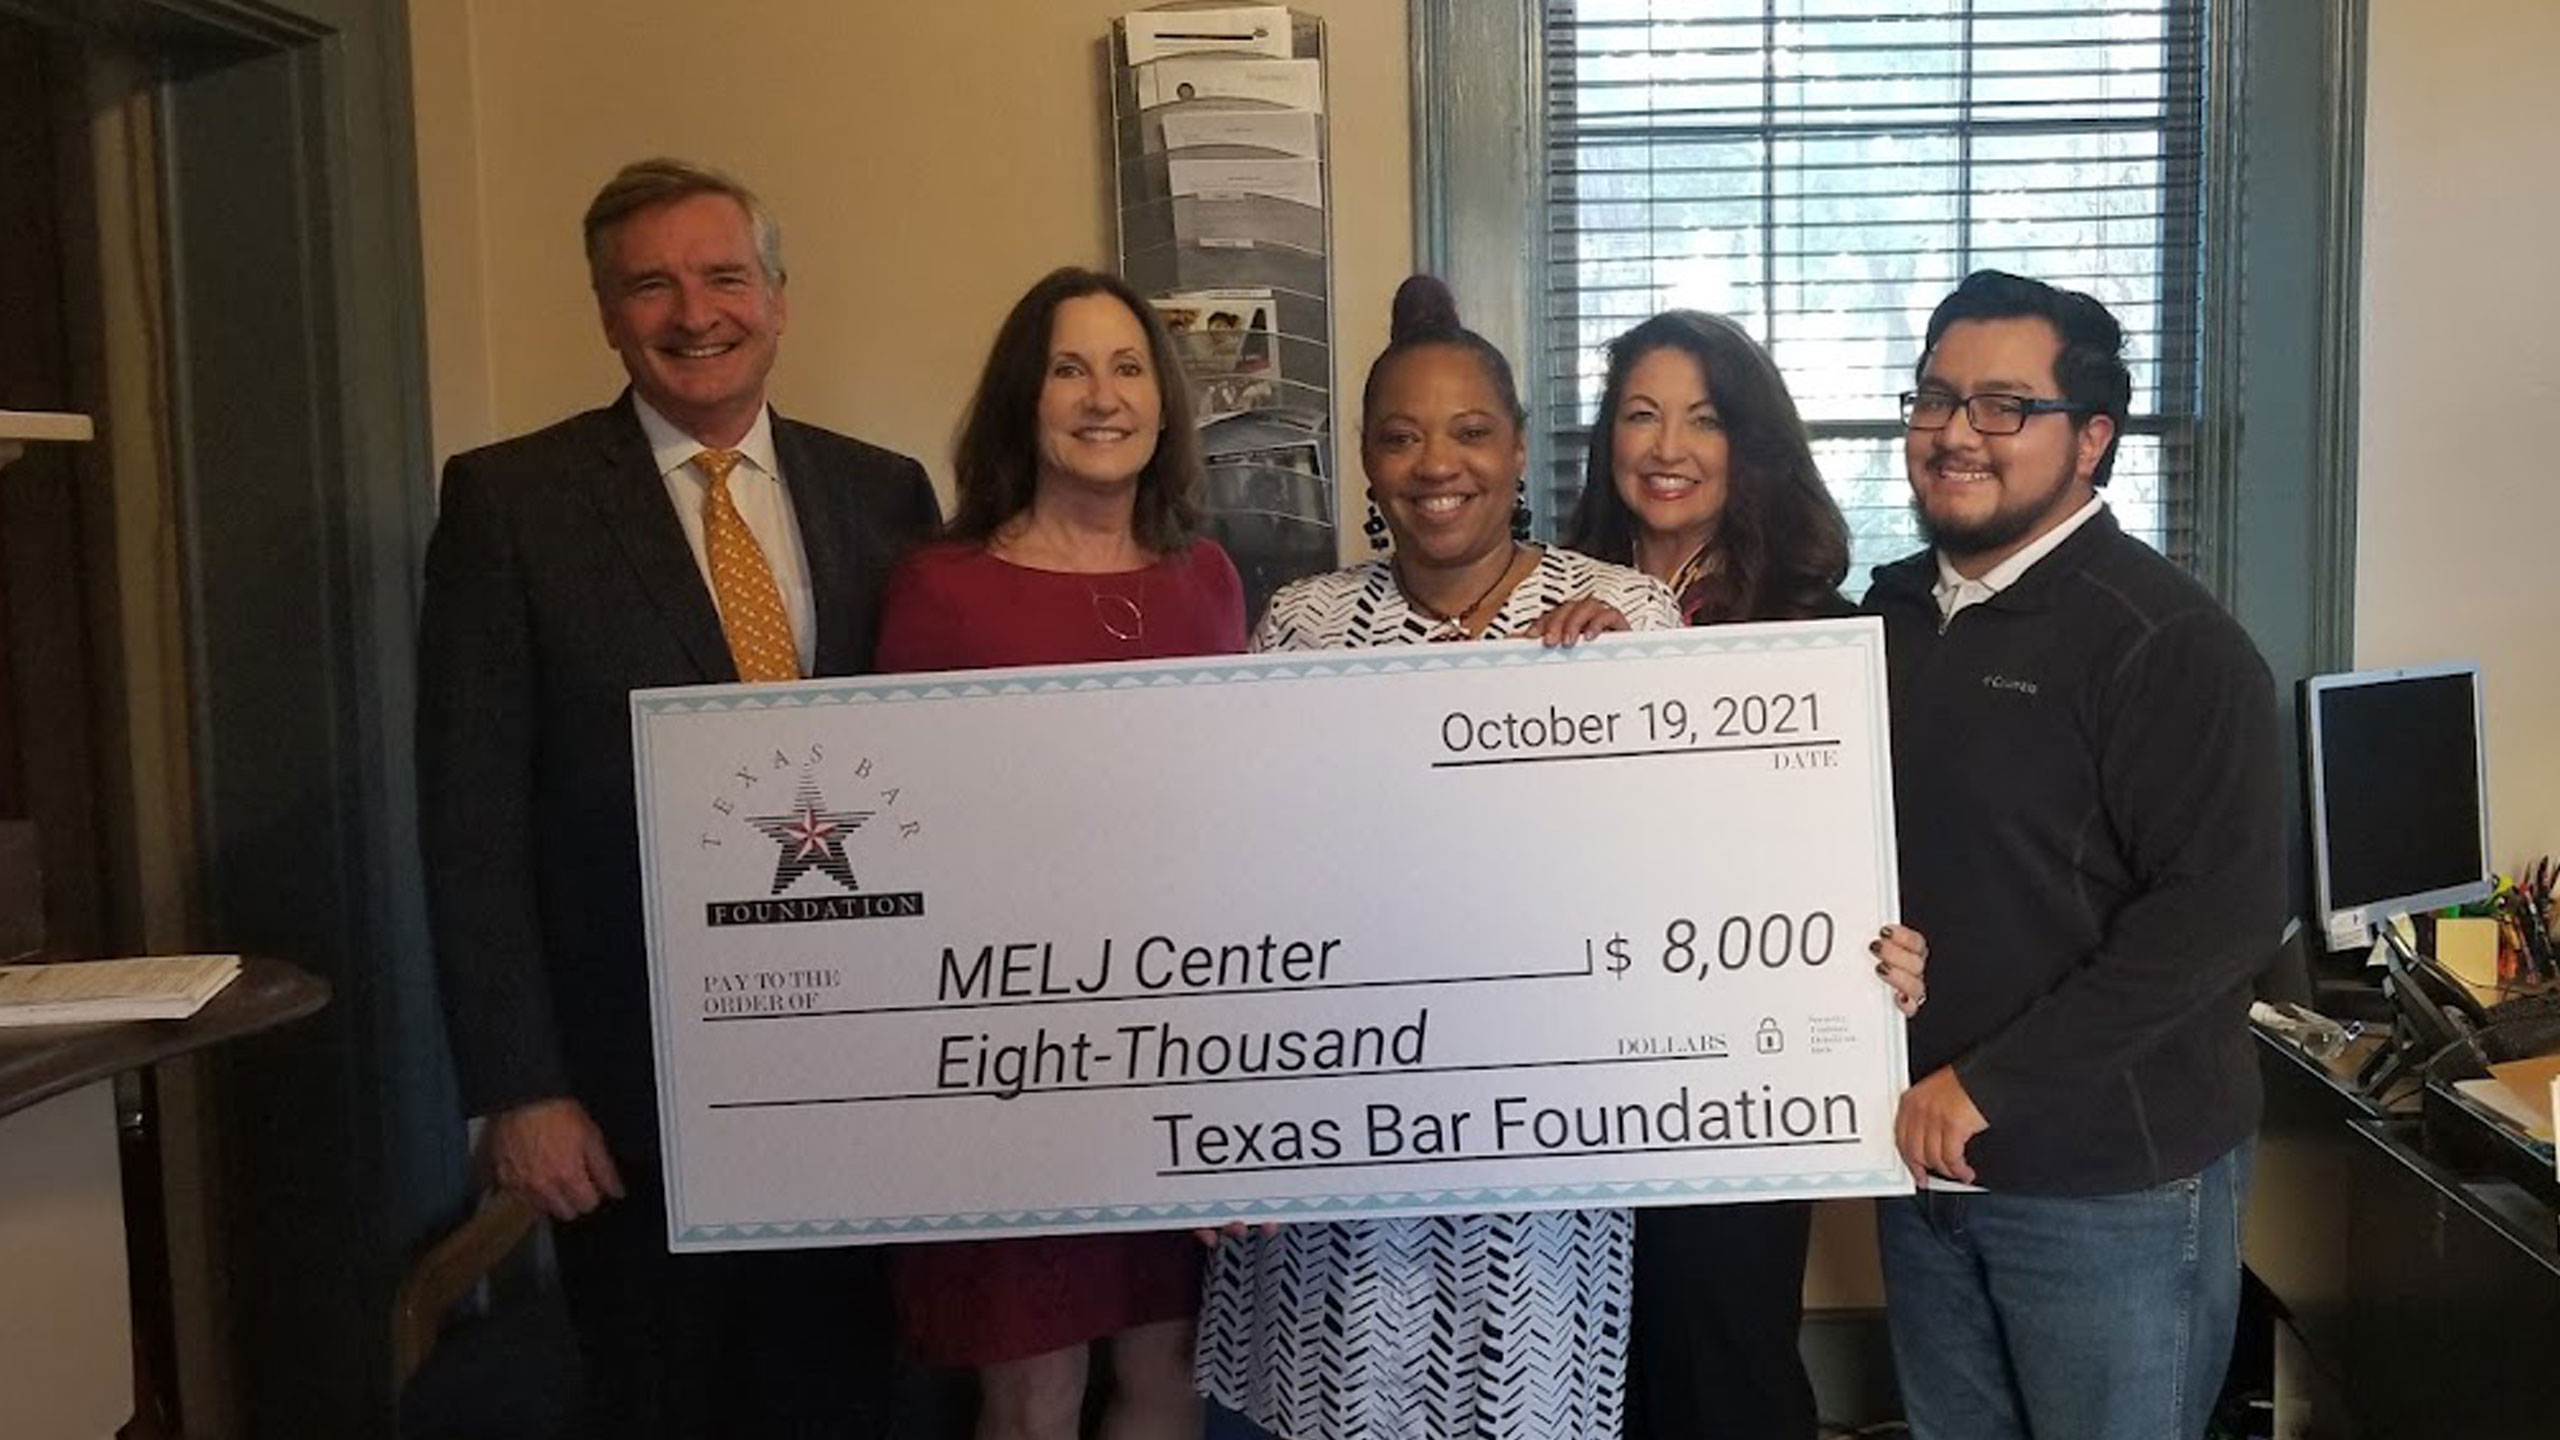 Texas Bar Foundation awarded ME3LJ Center $8,100 for the Iron Sharpens Iron Retro Project